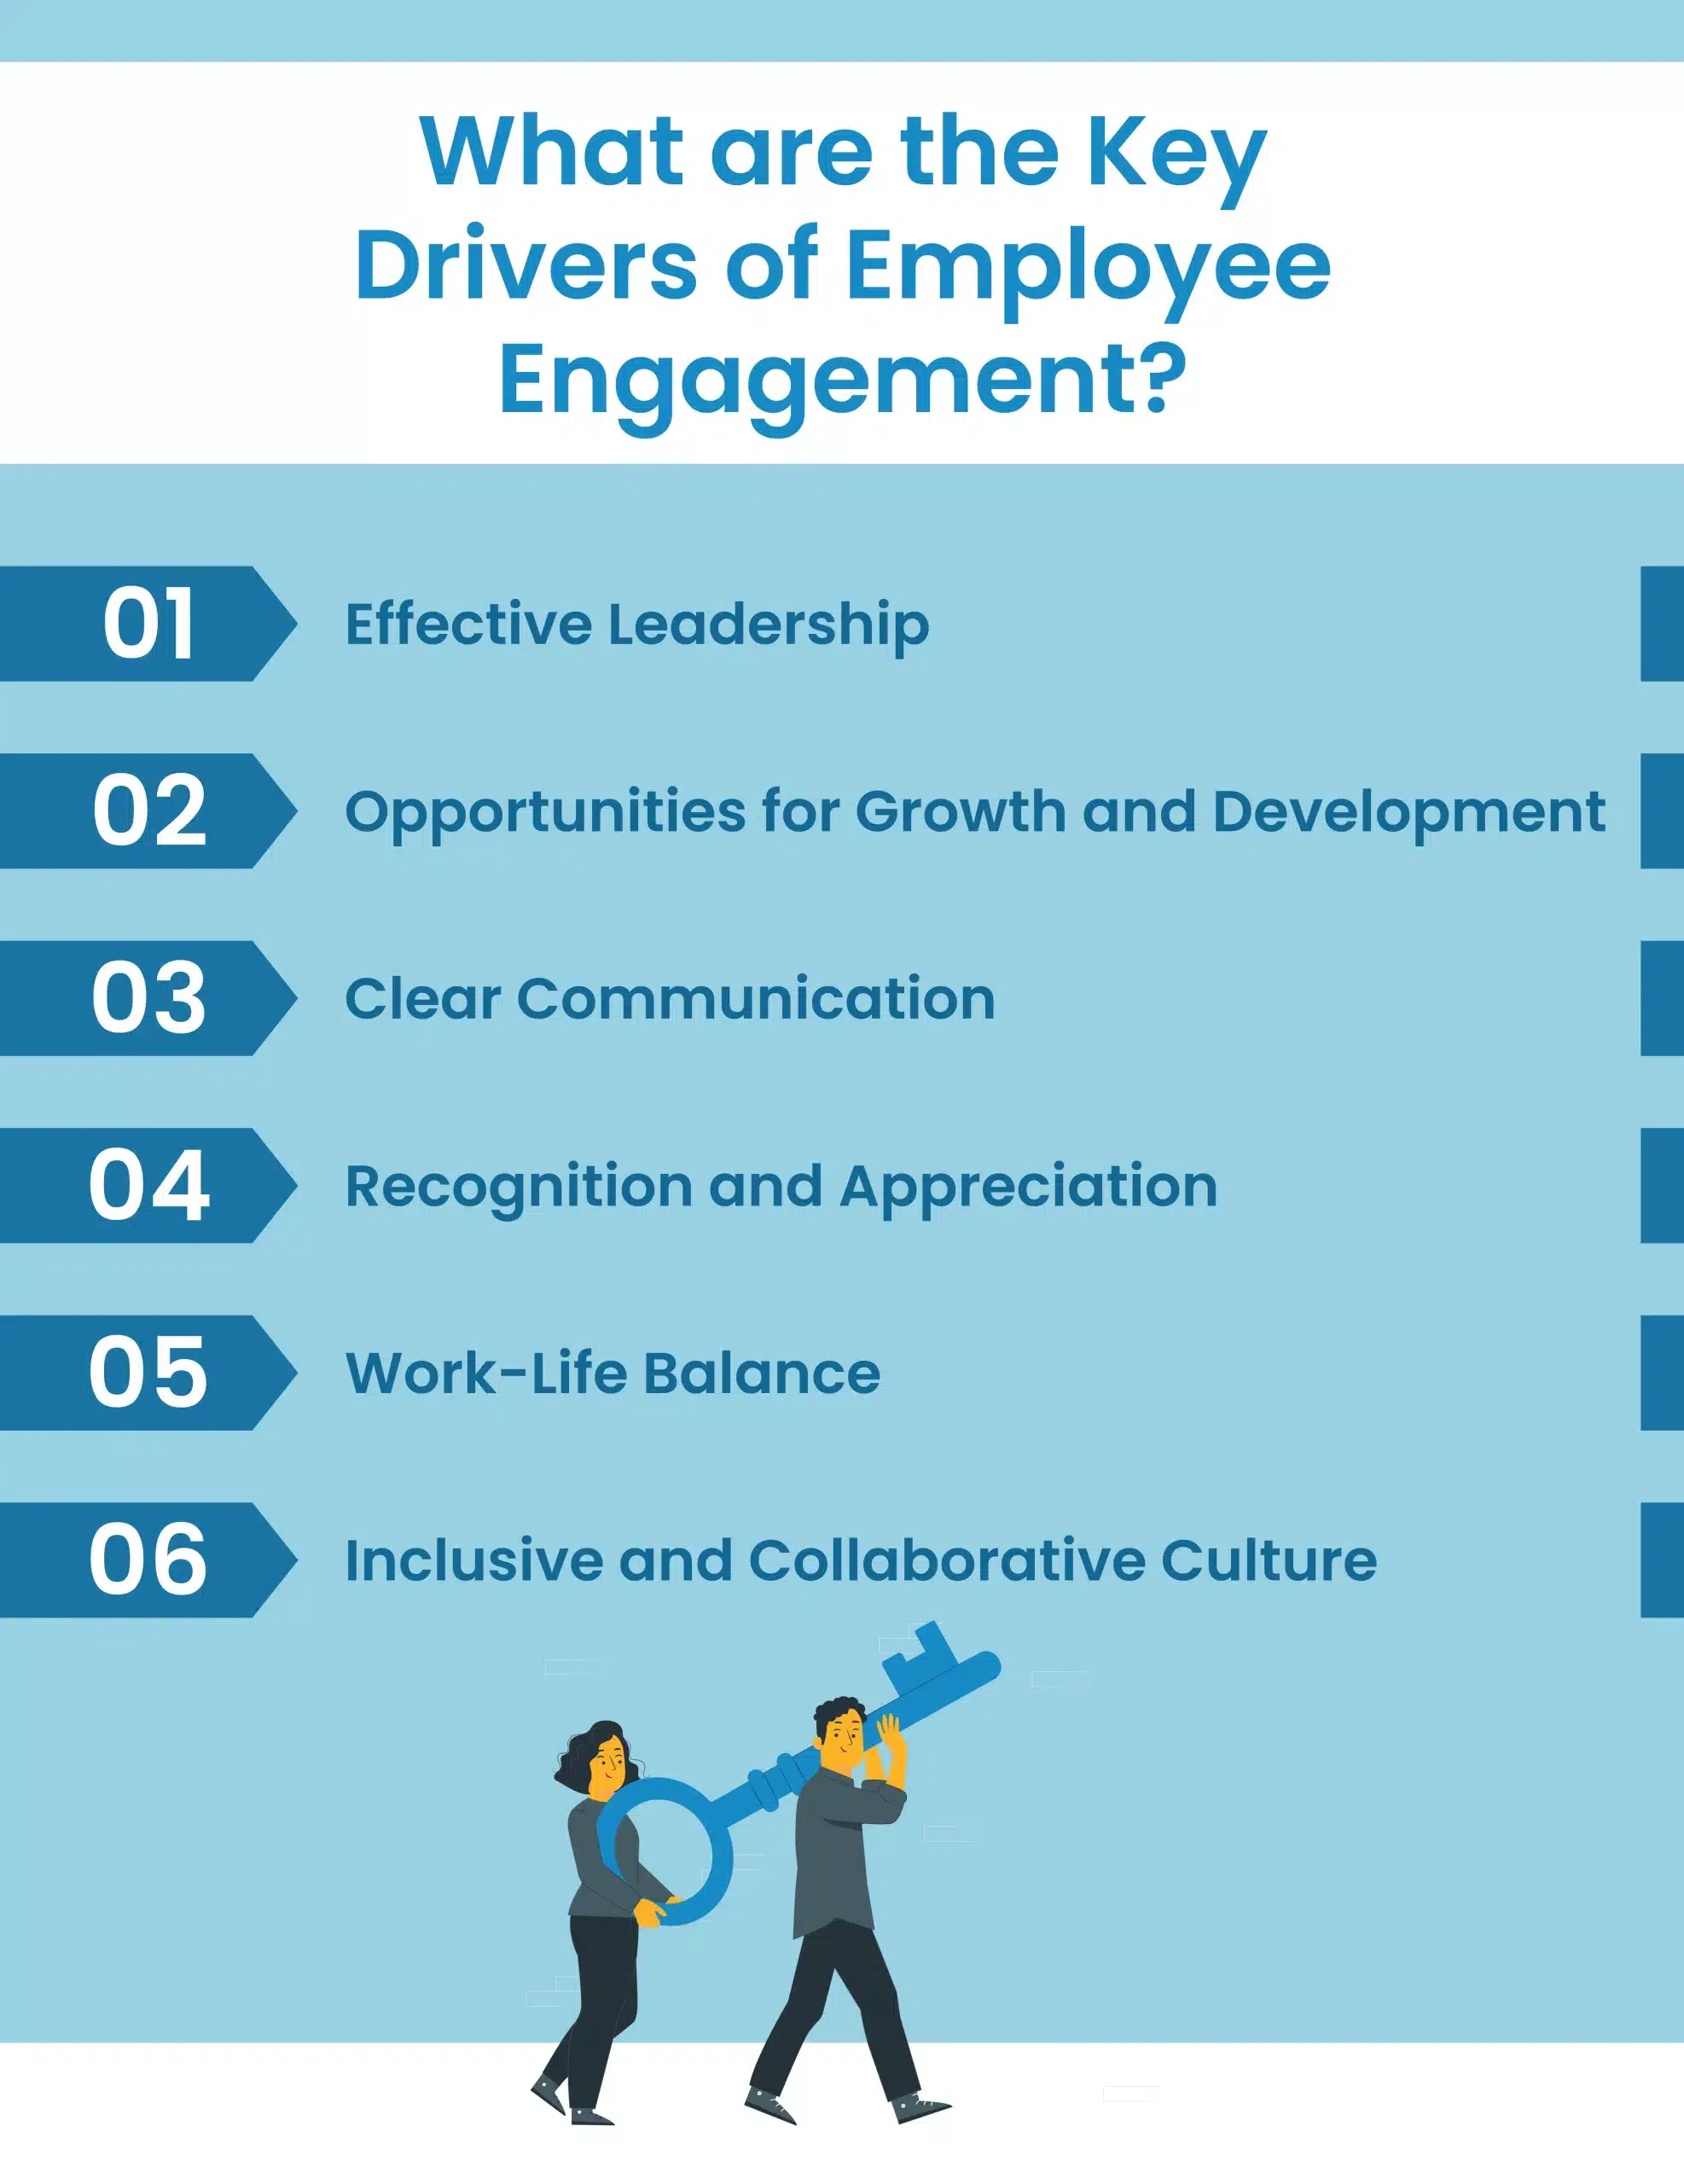 What are the Key Drivers of Employee Engagement